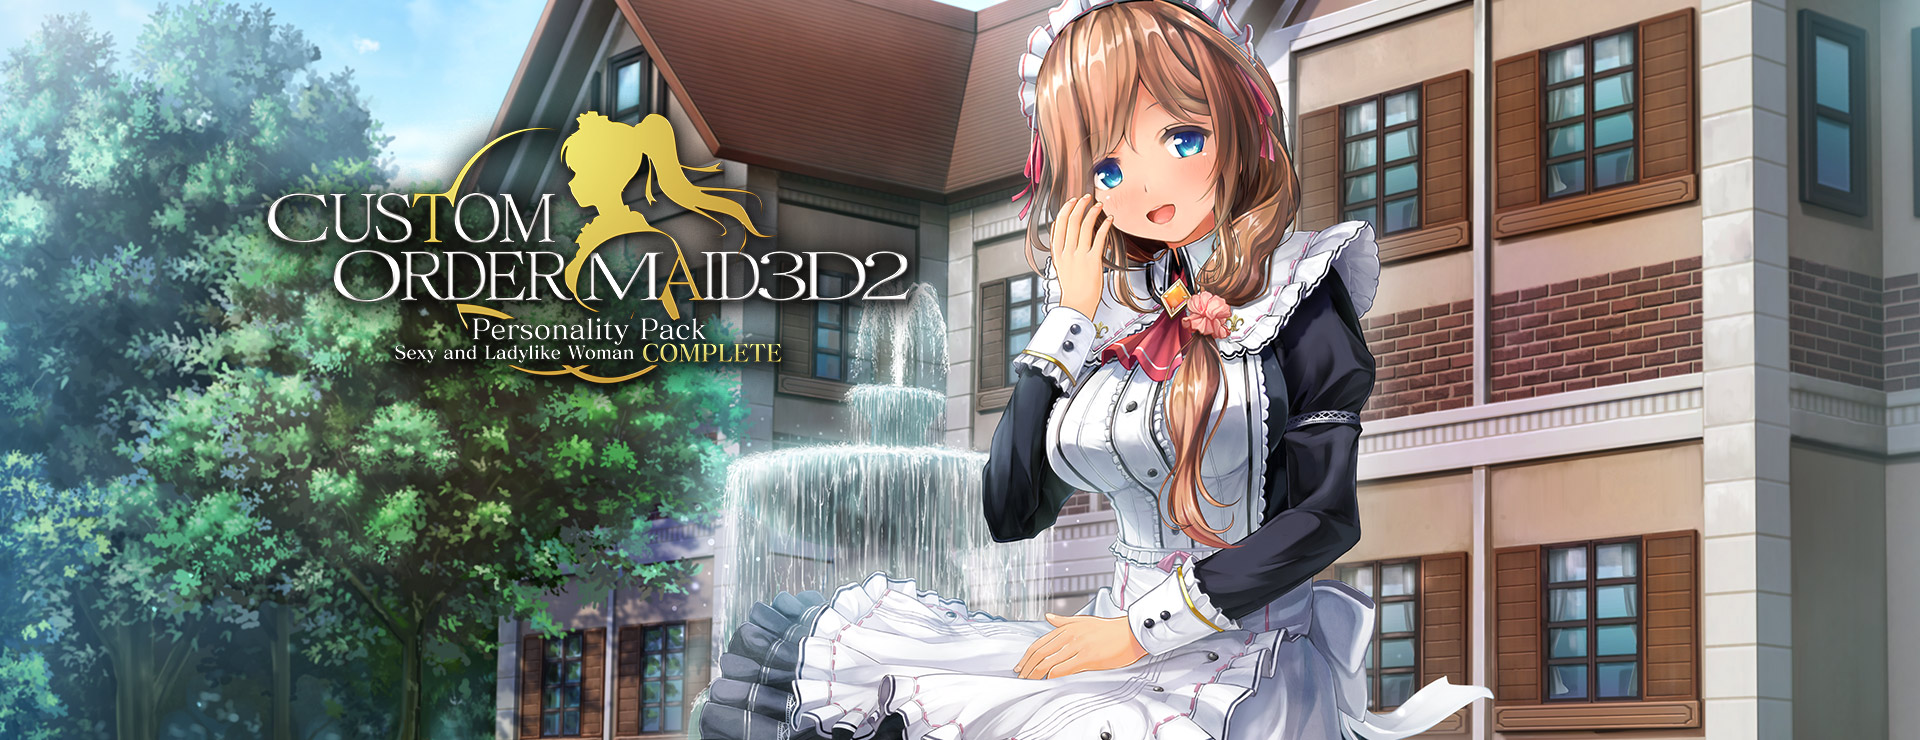 Custom Order Maid 3D 2: Sexy and Ladylike Woman Complete Bundle - Simulation Game